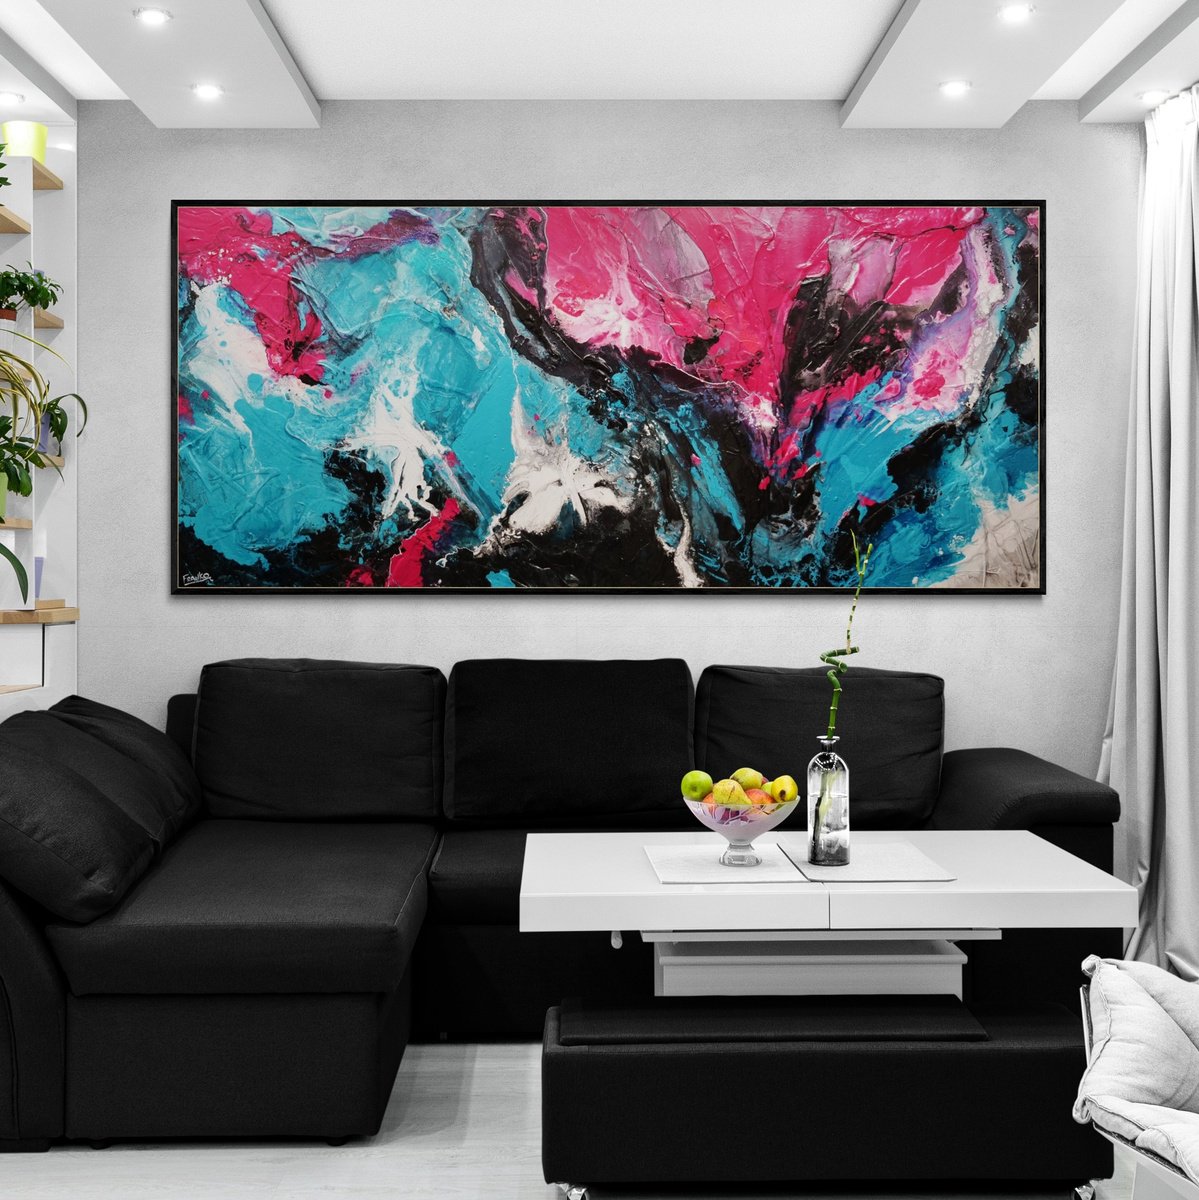 Magic 270cm x 120cm Textured Abstract Art by Franko